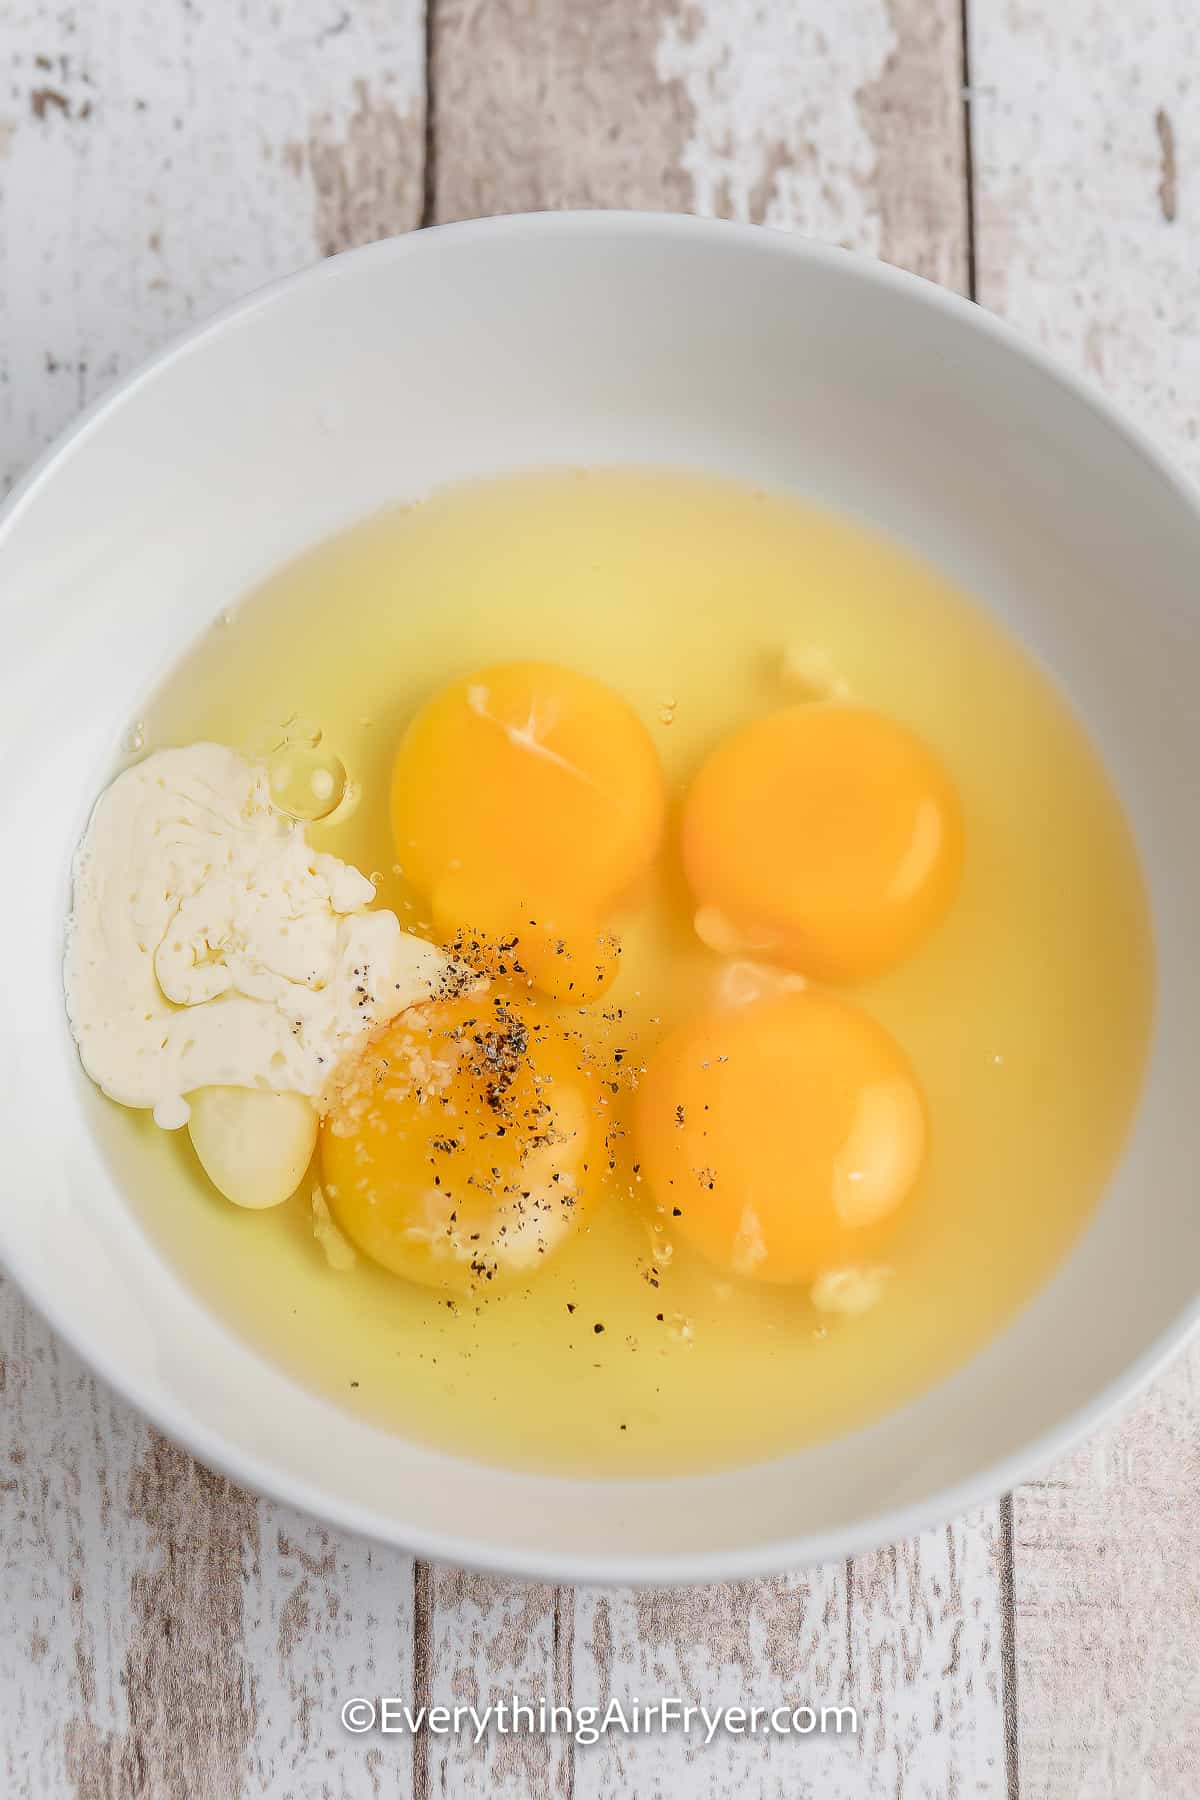 Ingredients to make Microwave Eggs in a bowl